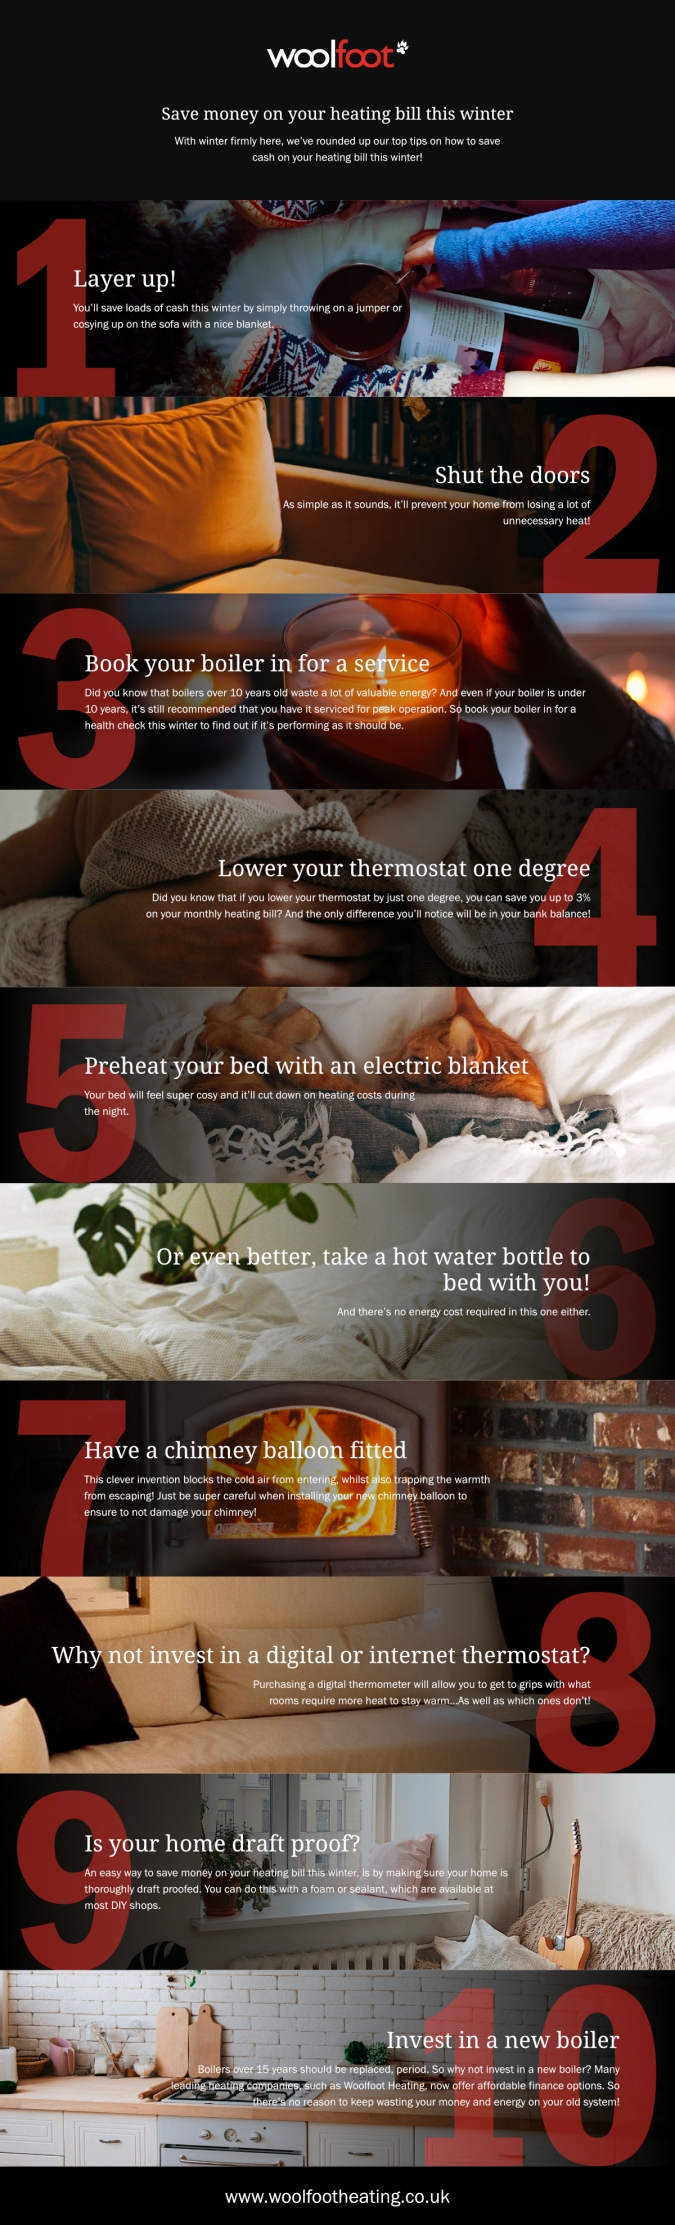 Stay Toasty: How To Save Money On Your Heating Bill by Fashion Du Jour LDN. Infographic by Woolfoot Heating